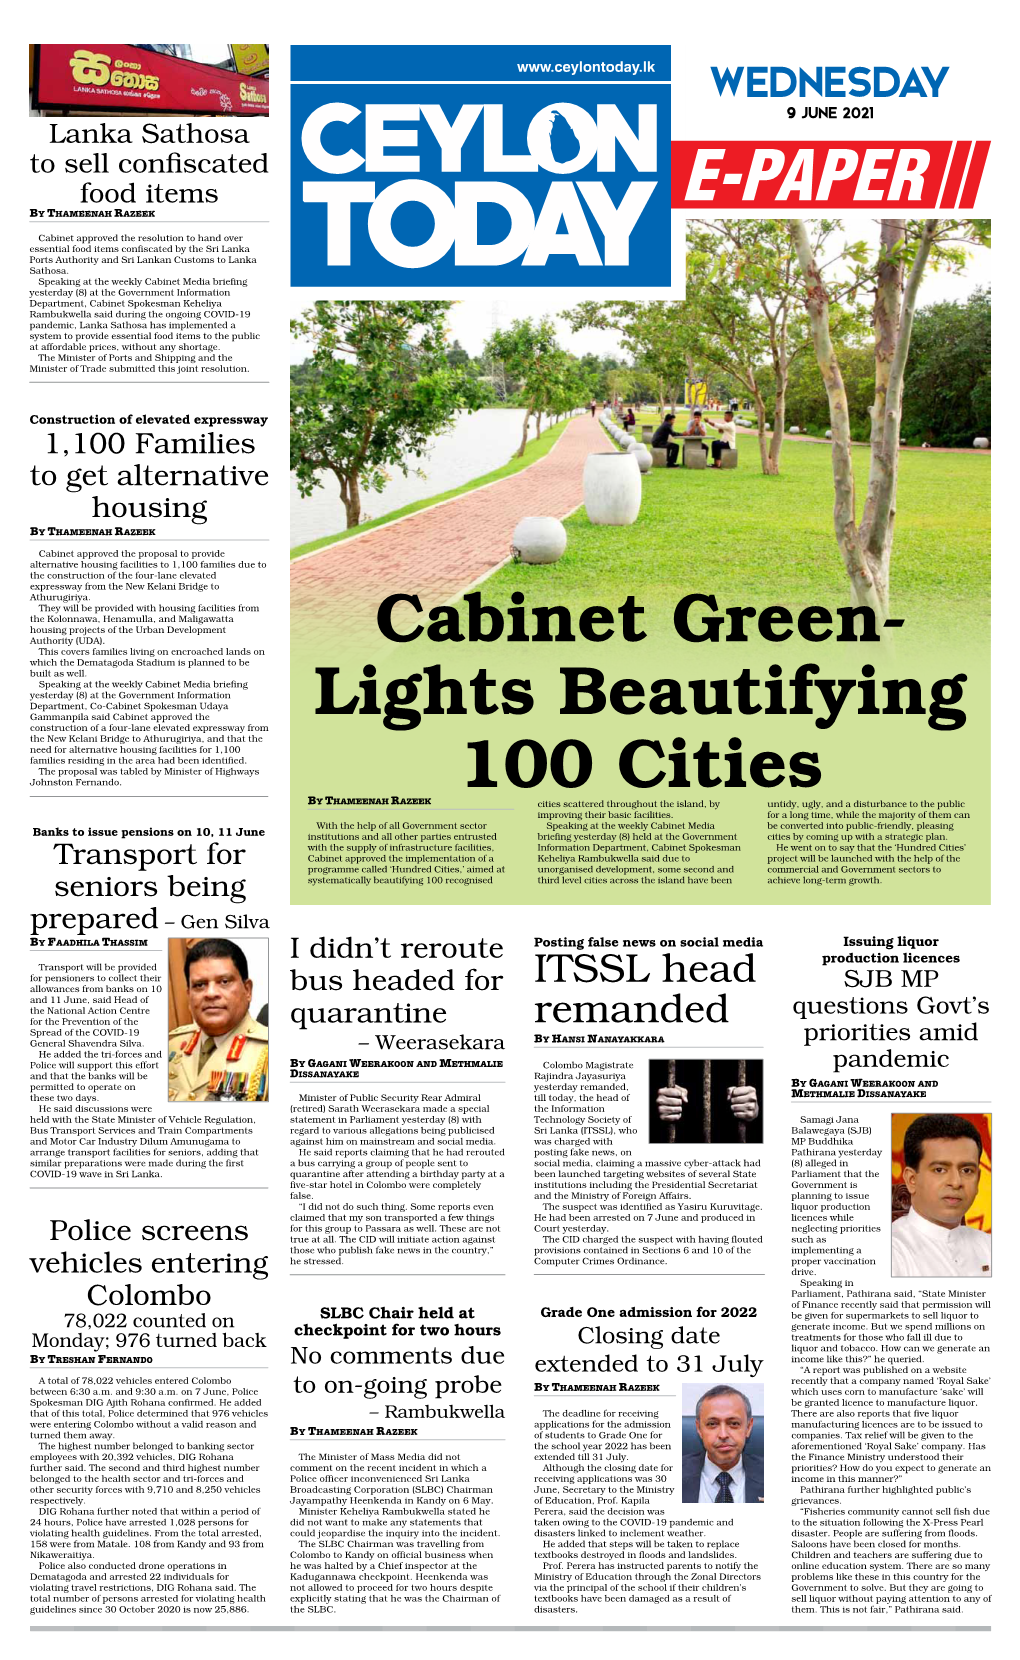 Cabinet Green- Lights Beautifying 100 Cities